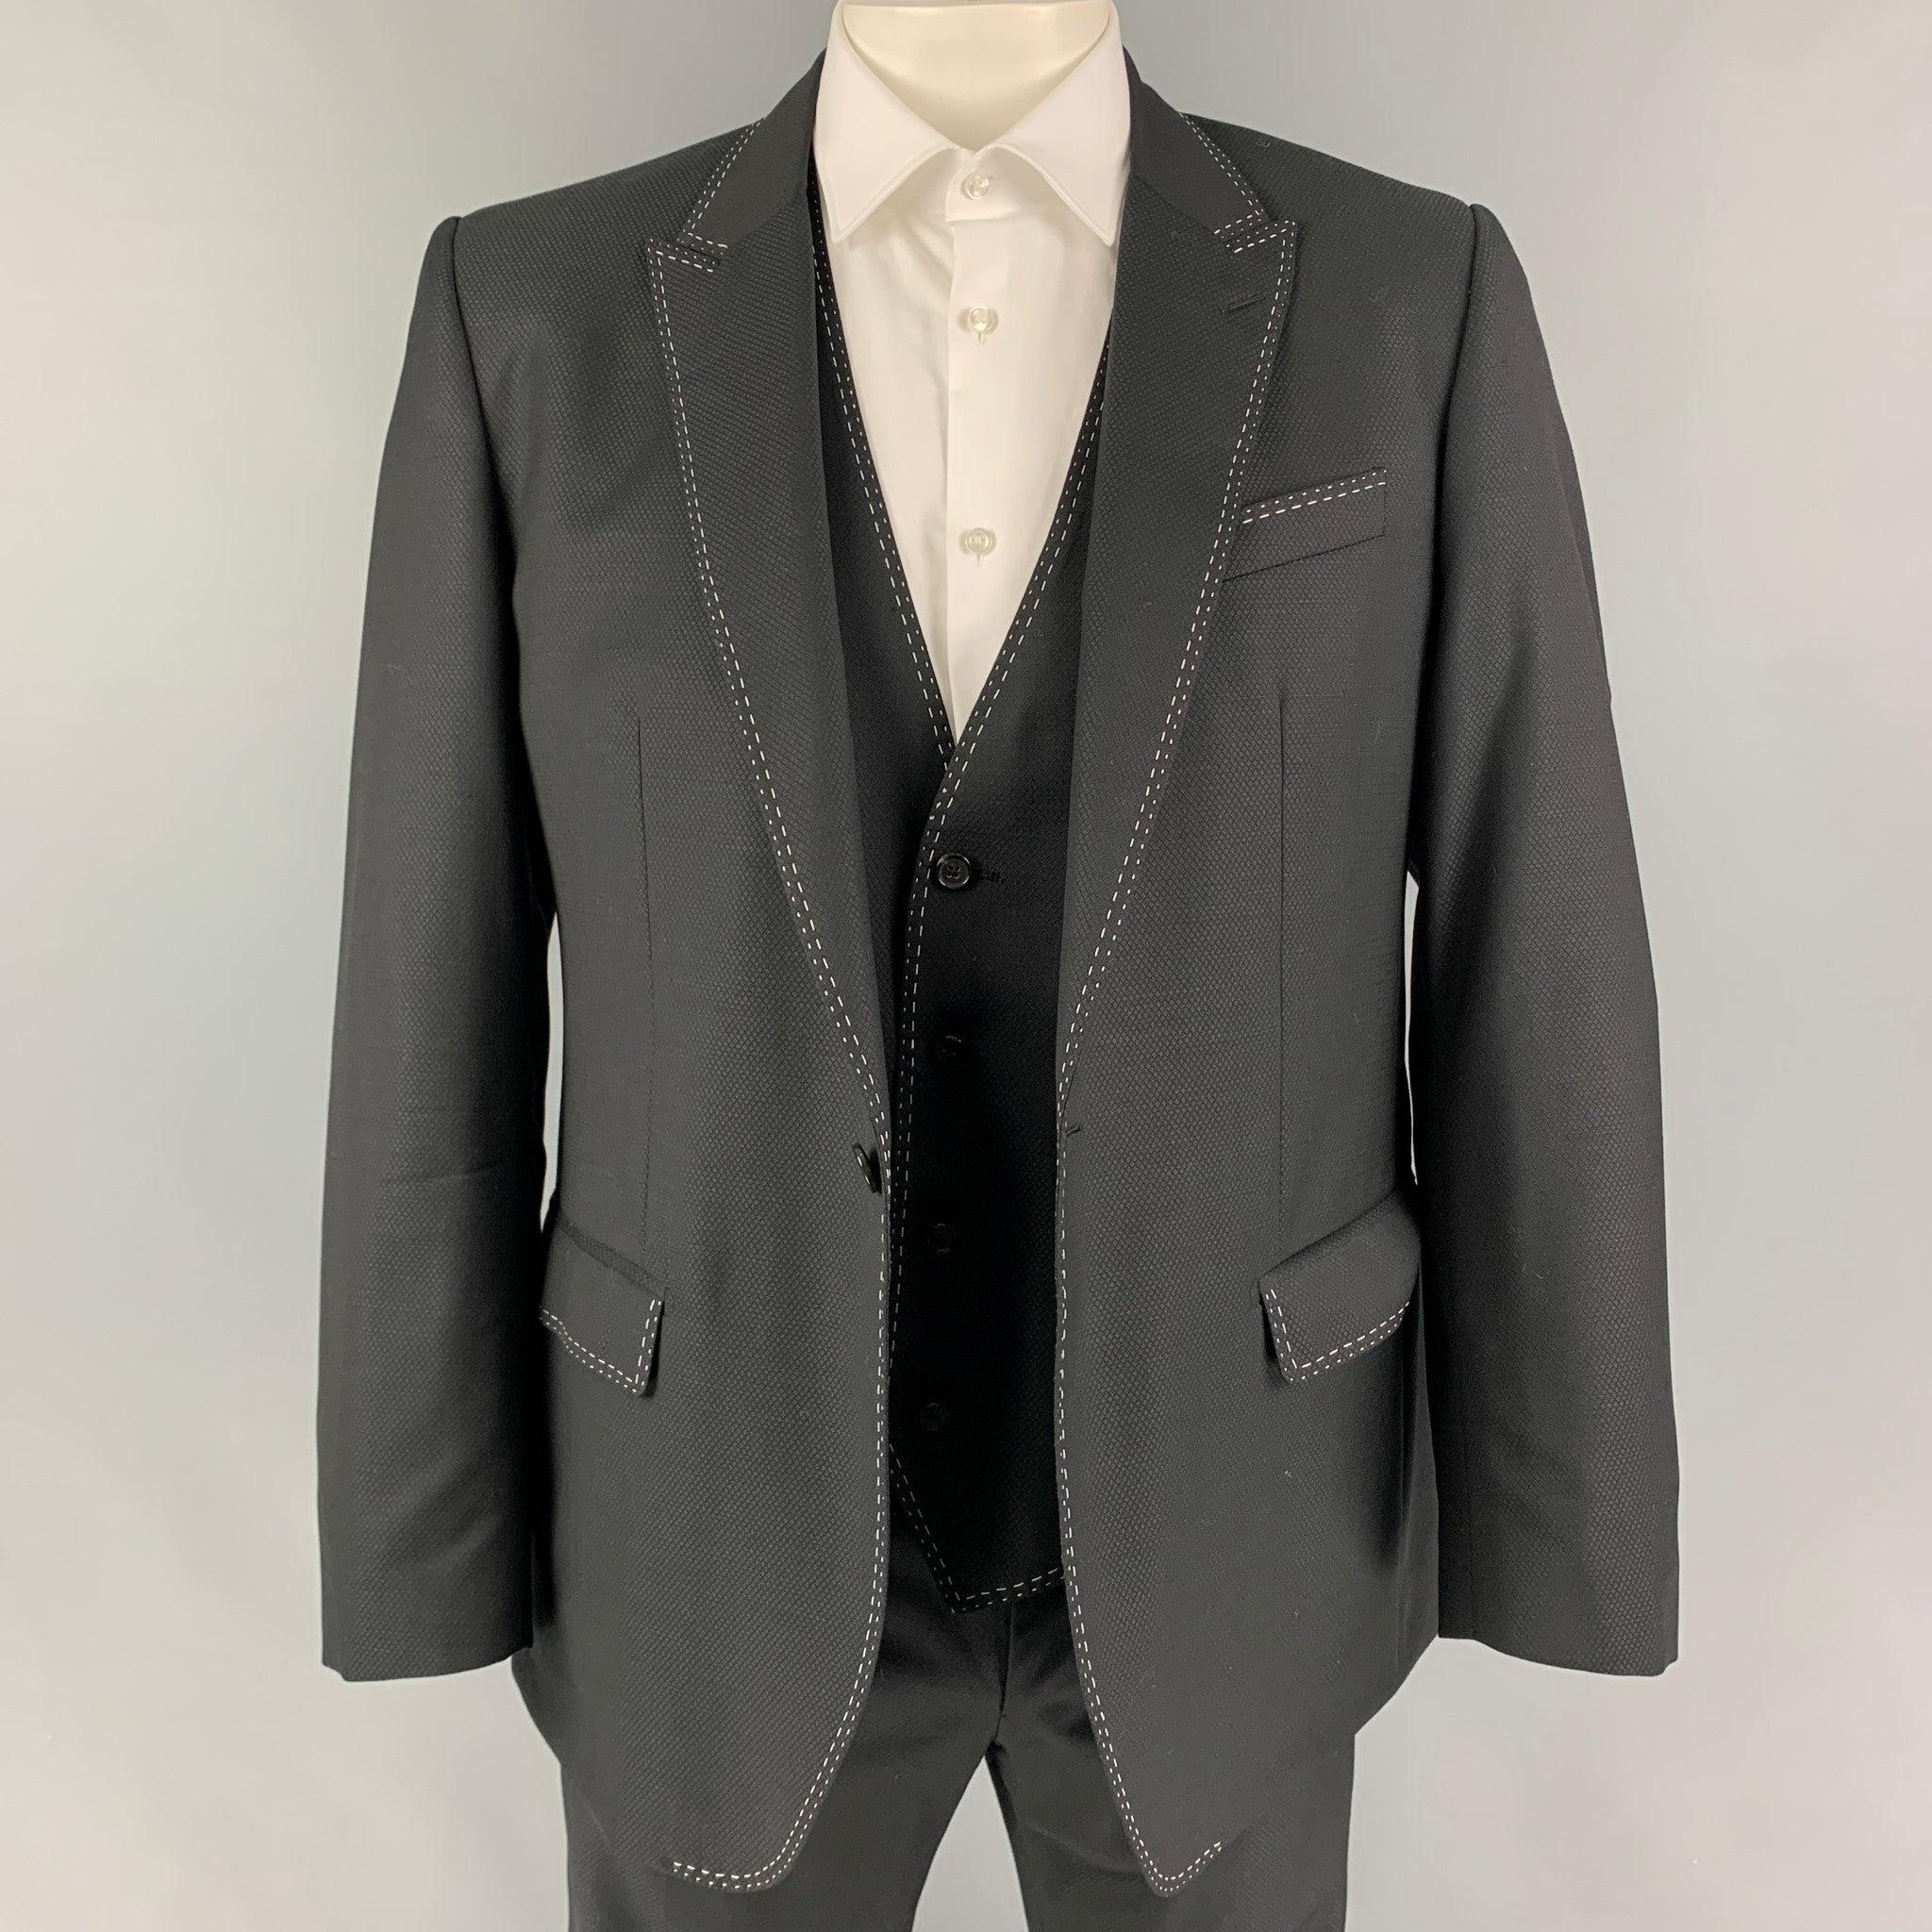 DOLCE & GABBANA Size 42 Black Contrast Stitch Wool Peak Lapel 3 Piece Suit In Excellent Condition For Sale In San Francisco, CA